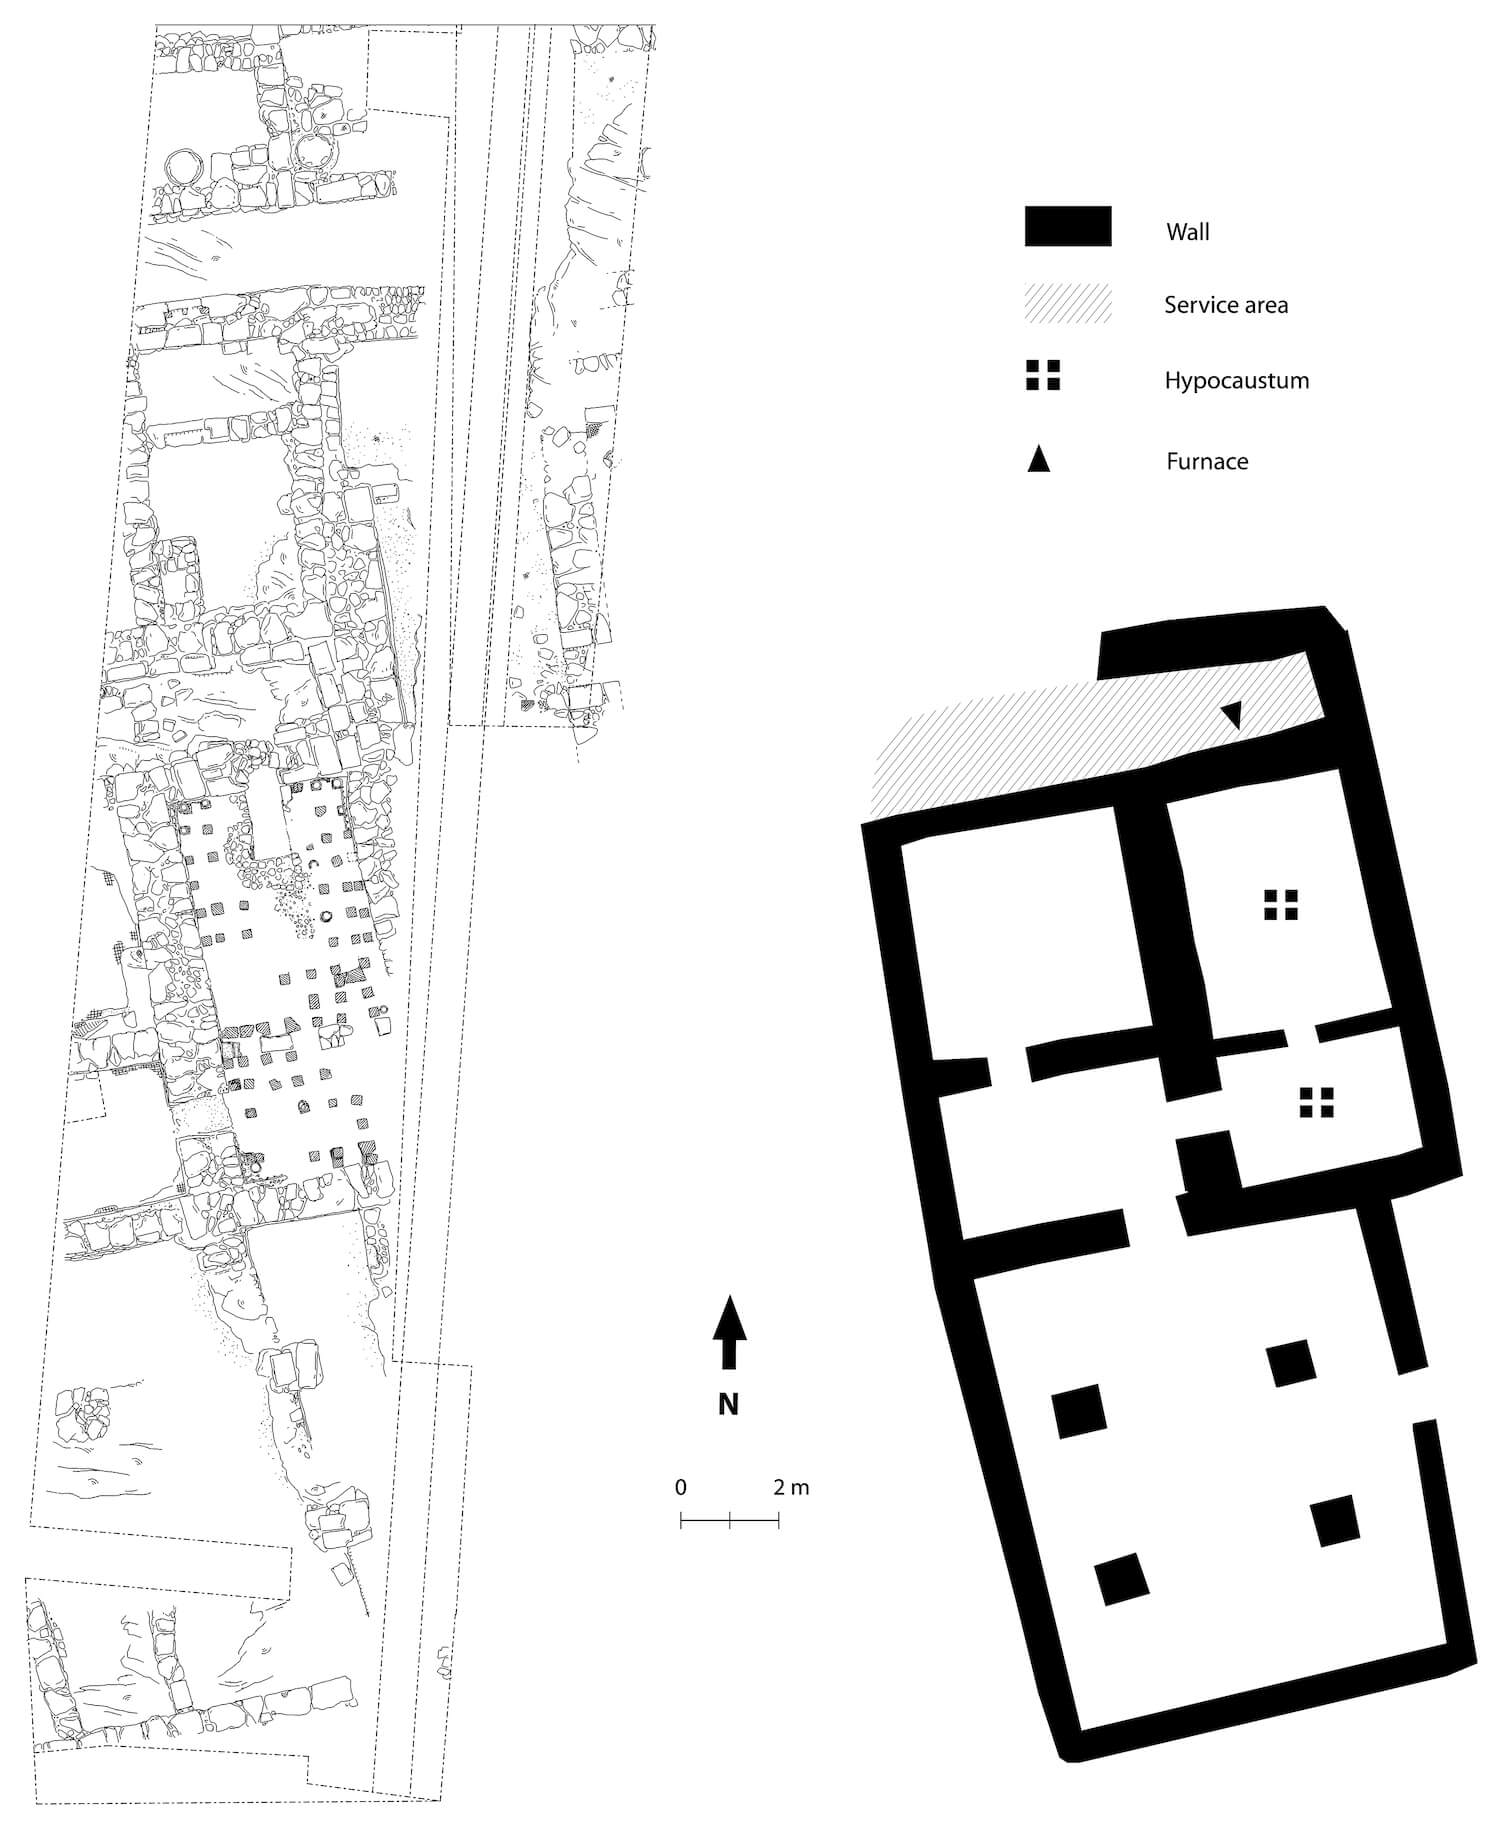 Plan of Southern Bathhouse in Shuafat. Excavation plan by V. Asman; proposed reconstruction plan by A. Kowalewska. Courtesy of the Israel Antiquities Authority.